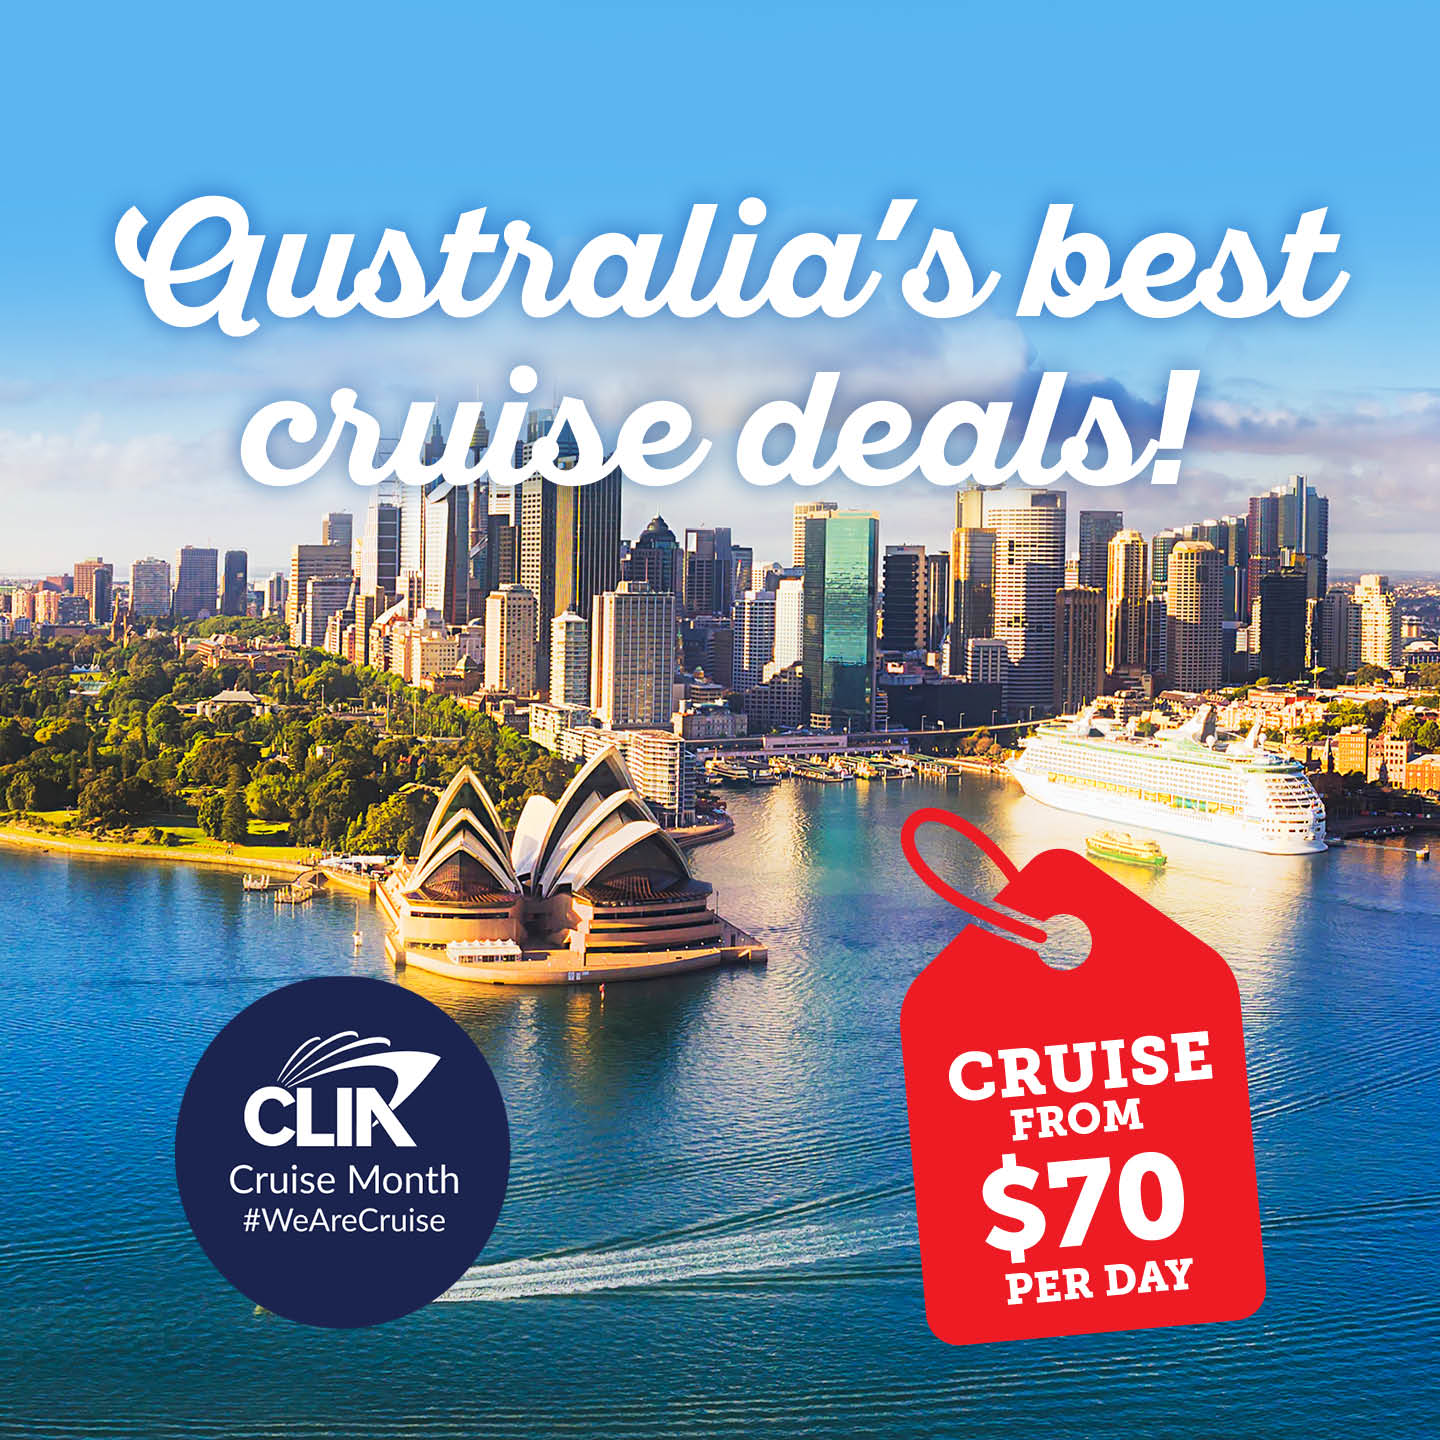 cheap cruise deals from sydney